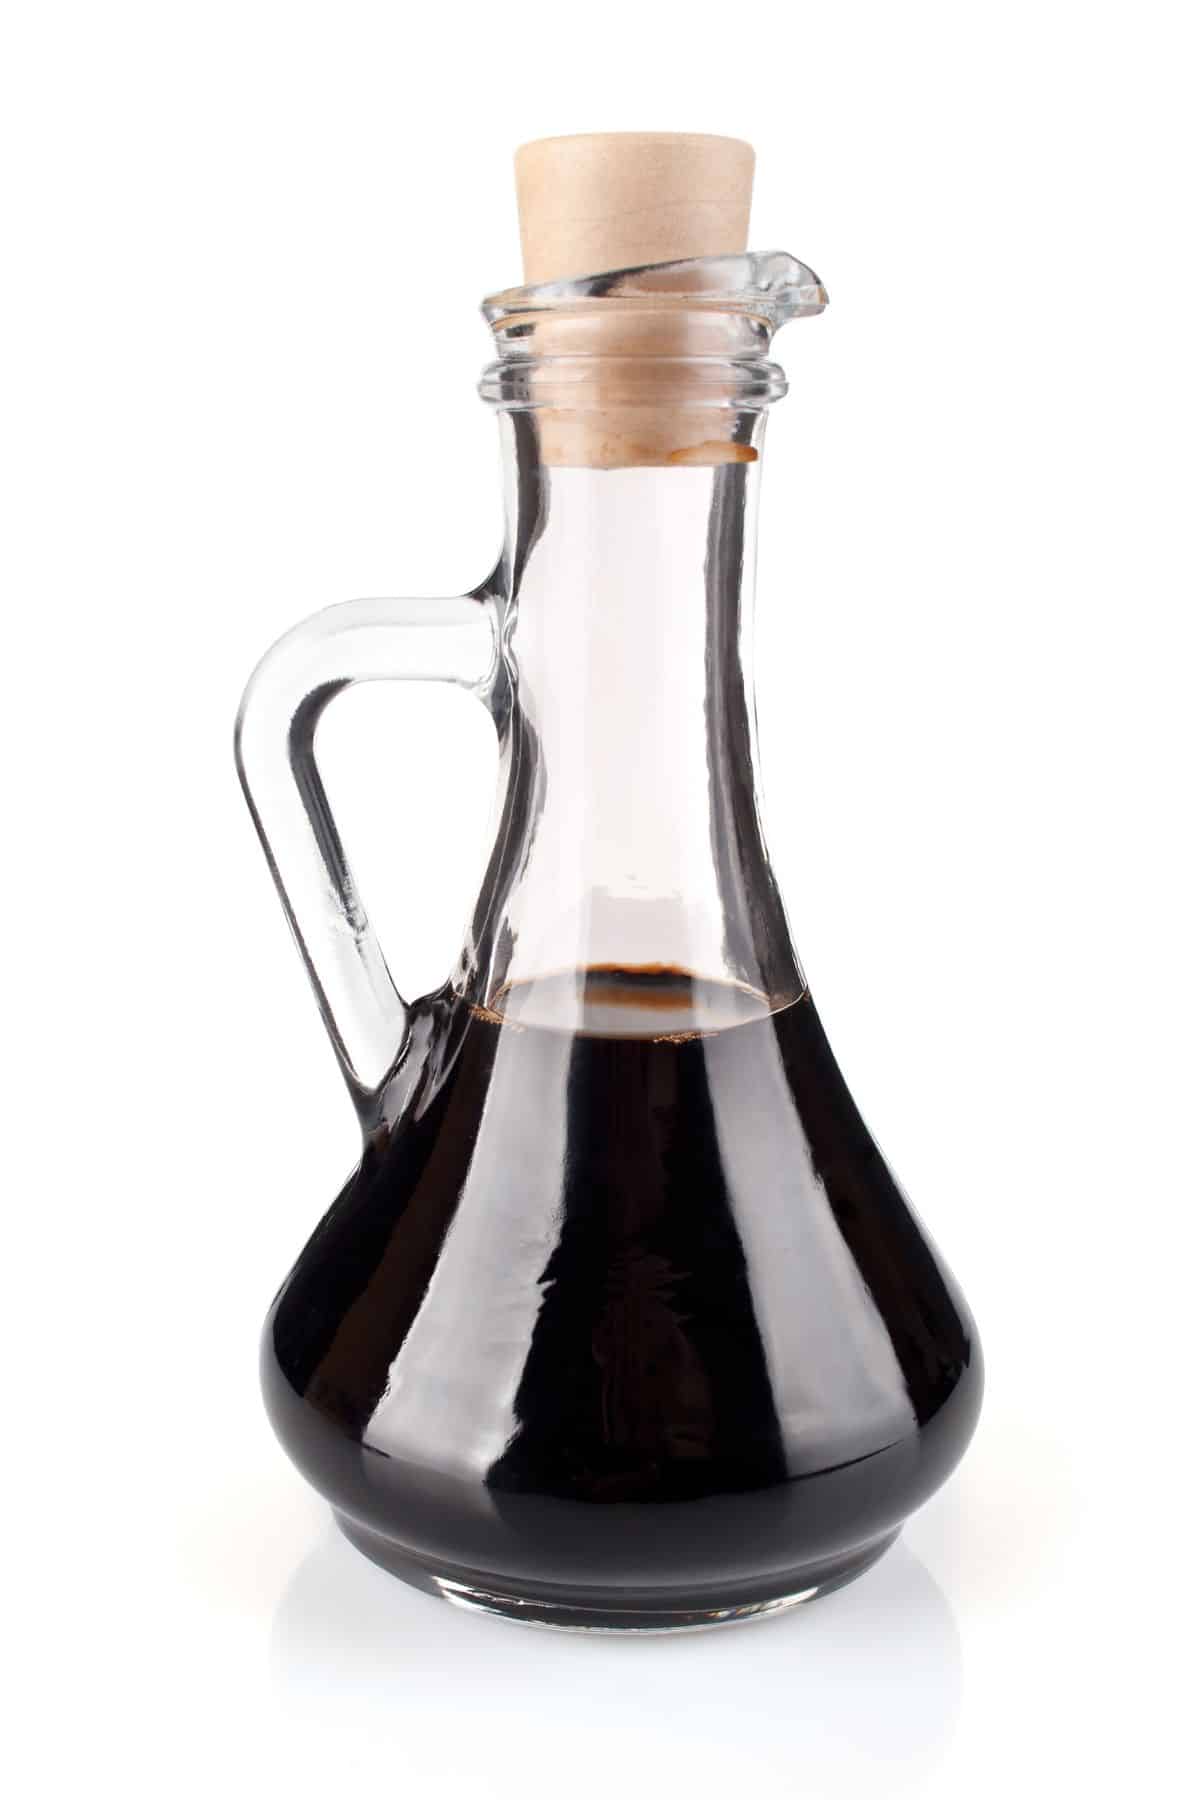 Bottle of balsamic vinegar with corked top.